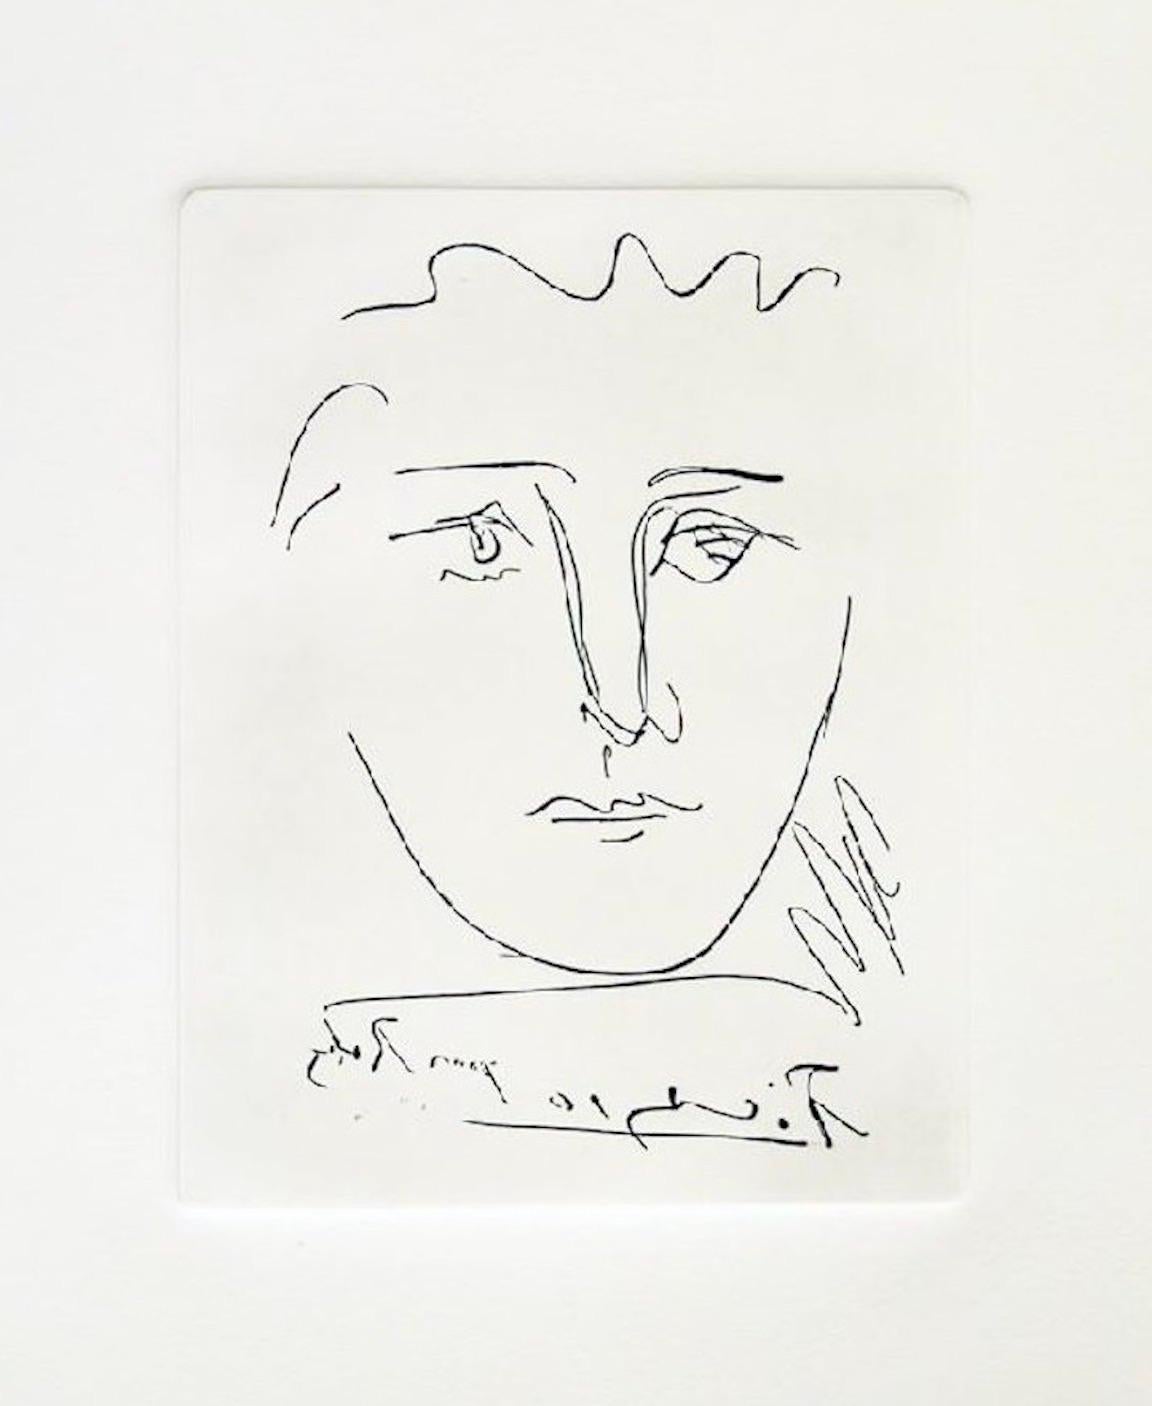 Very little need to be said of the legendary Picasso. This original Etching "Pour Roby" (For Roby) is a classic example of his genius.  Picasso originally drew this portrait for a friend, author Robert Godet, also known as Roby. He later etched the